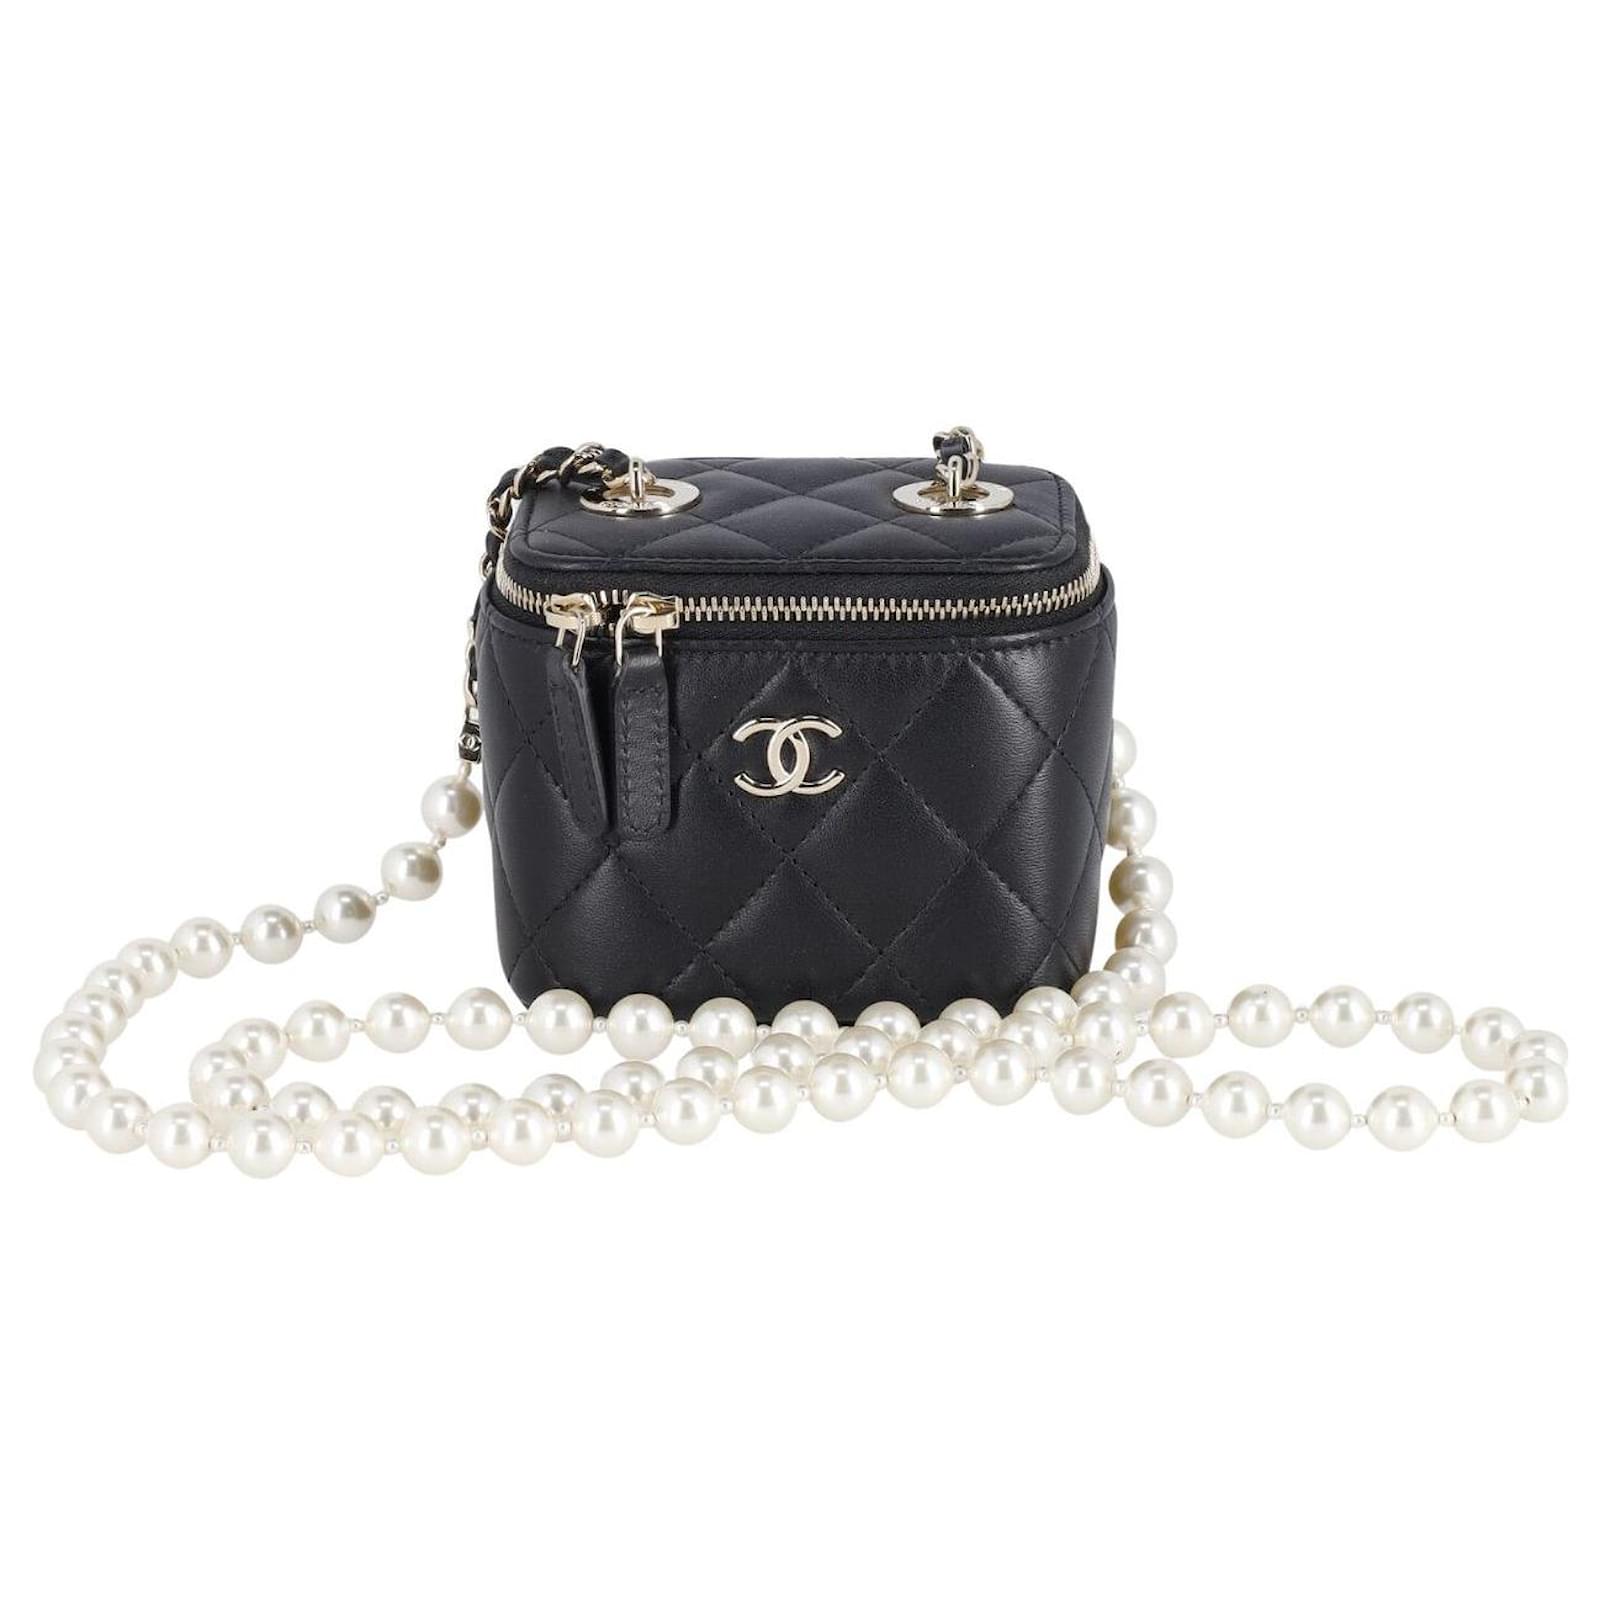 Chanel White Quilted Leather CC Pearl Phone Case Crossbody Bag Chanel